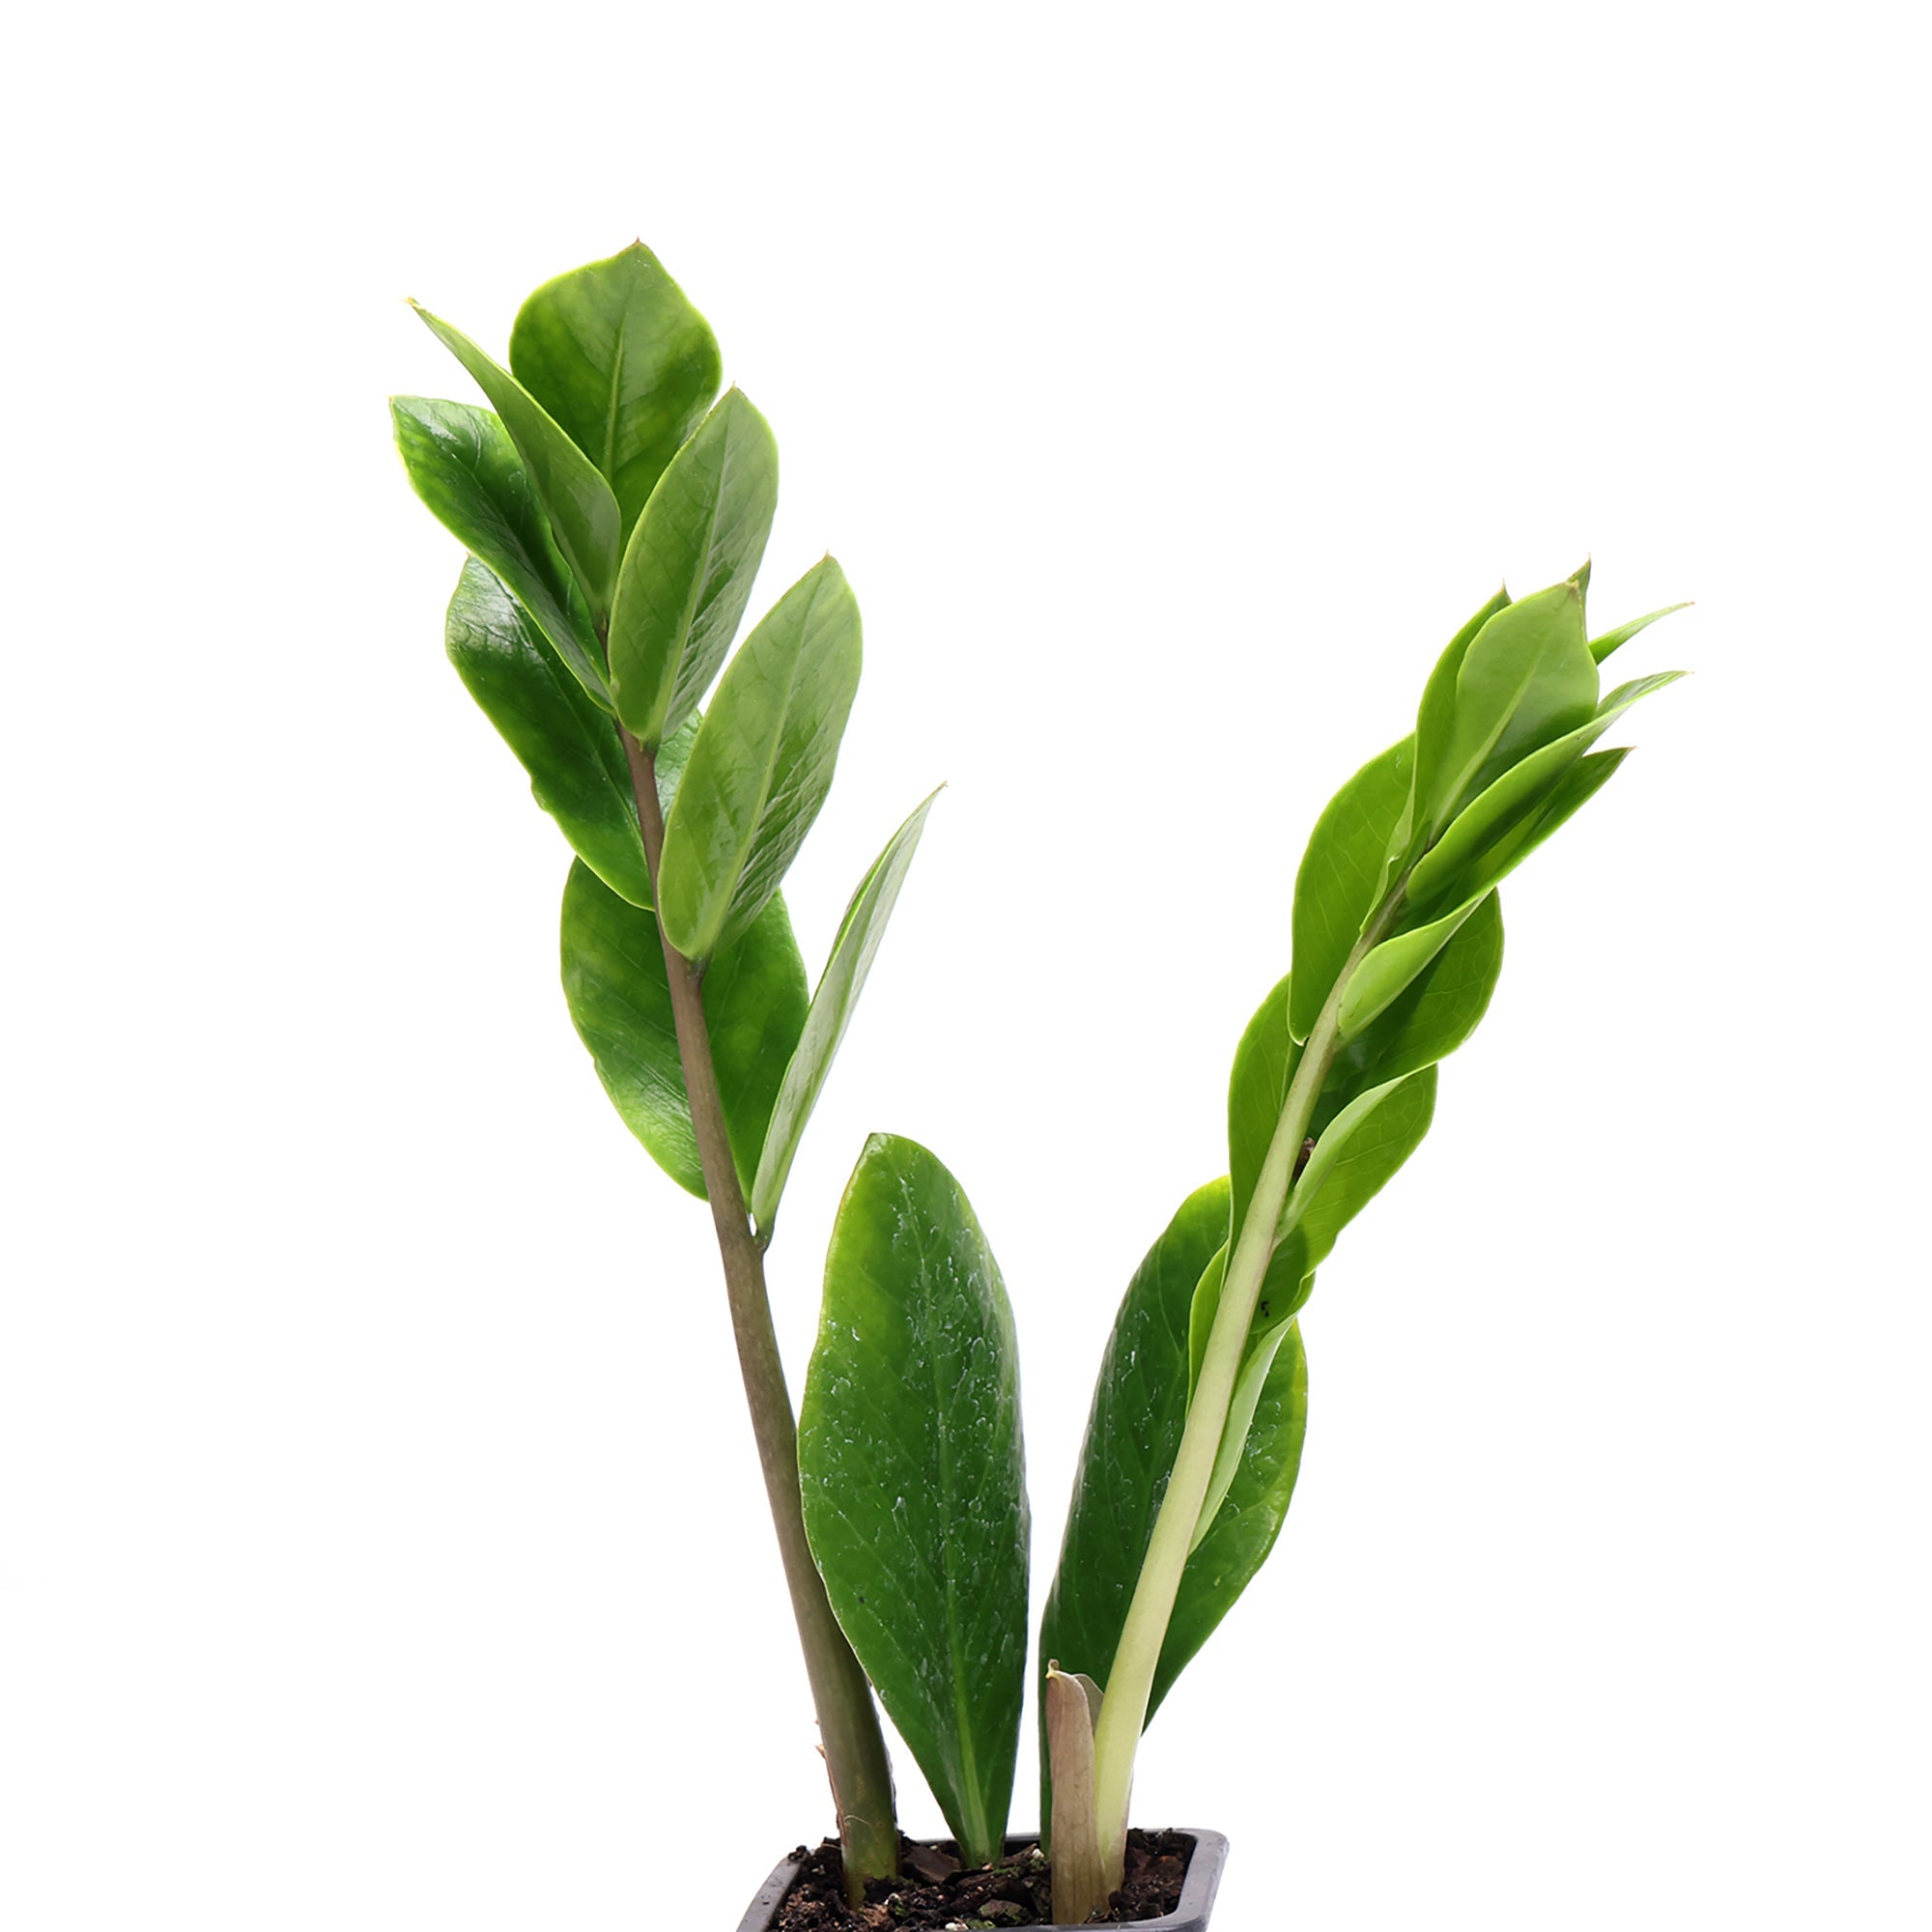 A small ZZ Plant 3 Inches plant, commonly known as zz plant, with glossy green leaves, potted in a black plastic container against a white background. By Chive Studio.